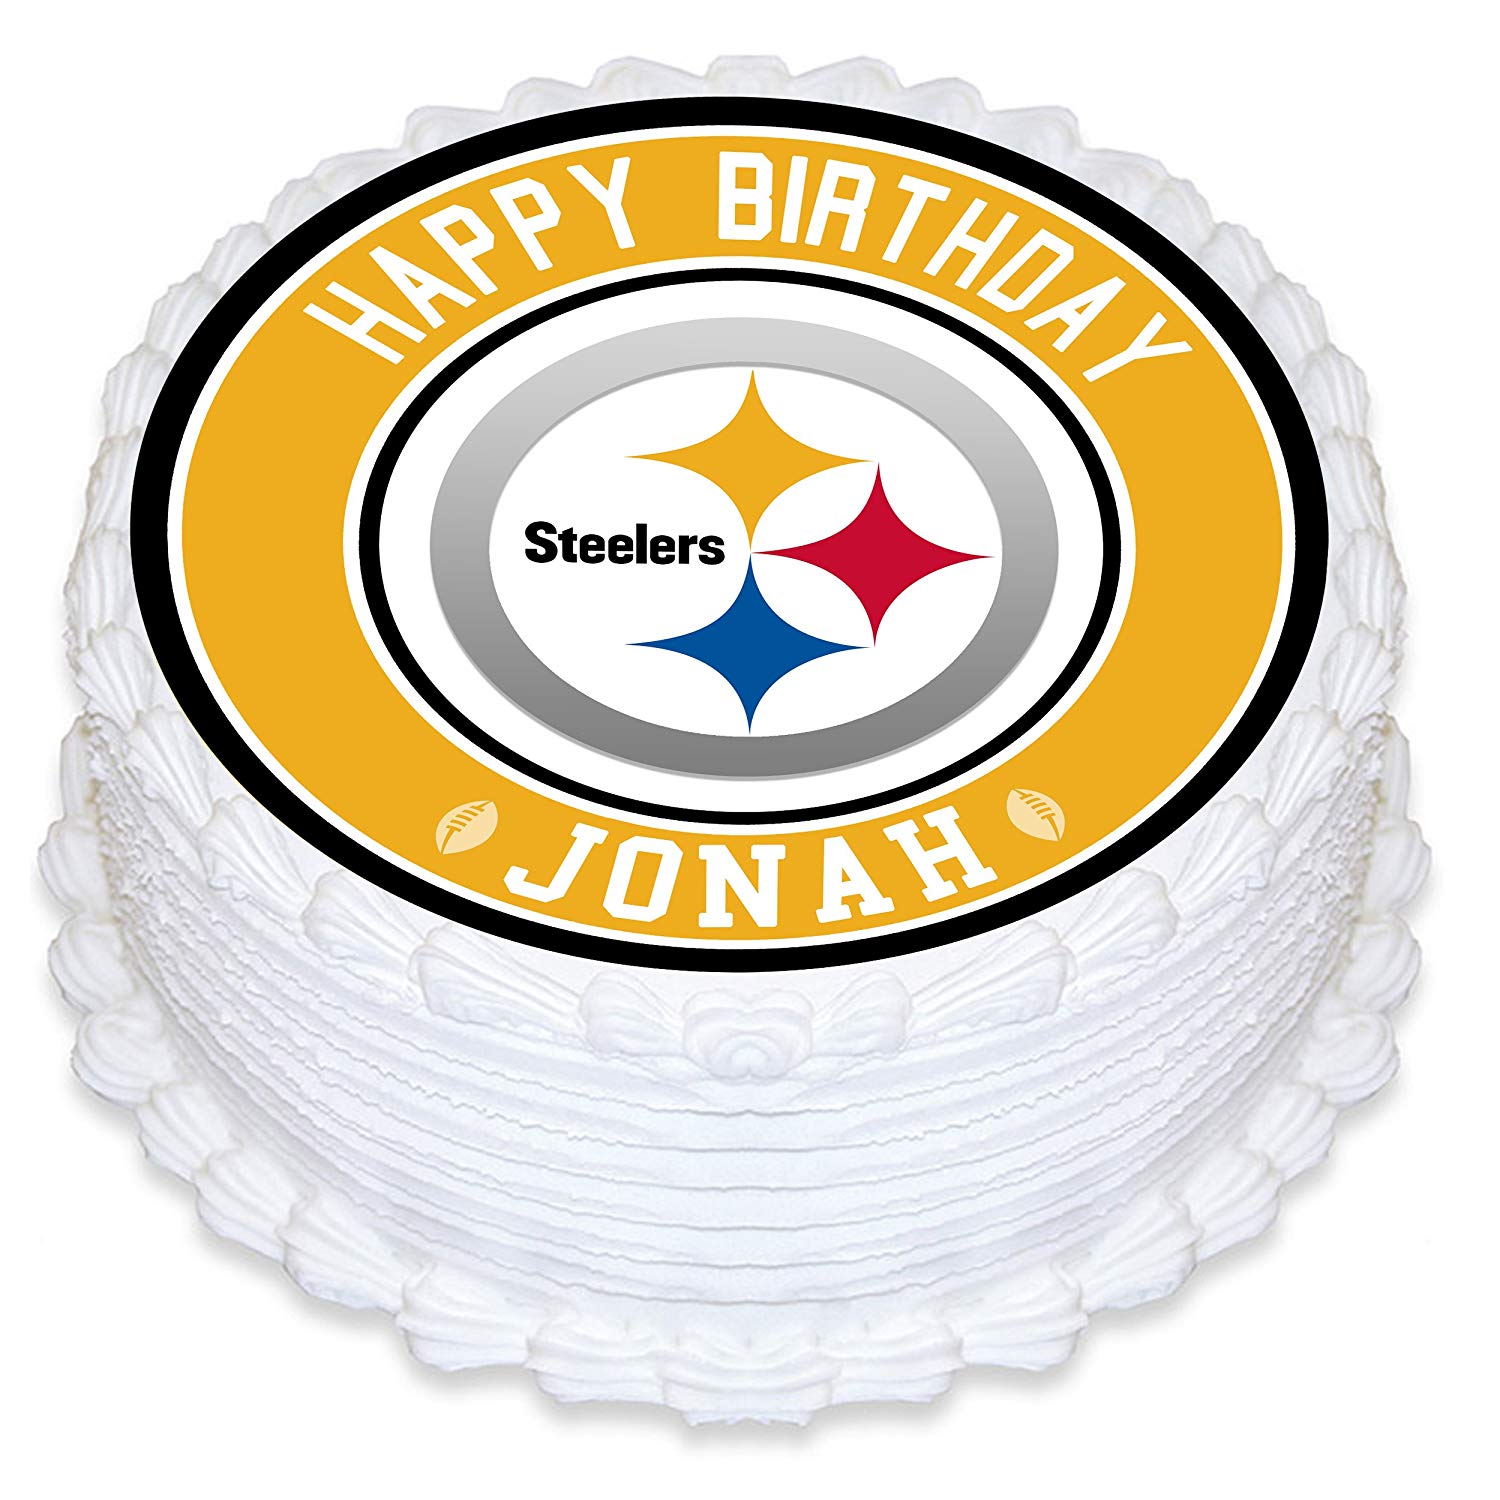 Pittsburgh Steelers Edible Image Cake Topper Personalized Birthday She -  PartyCreationz